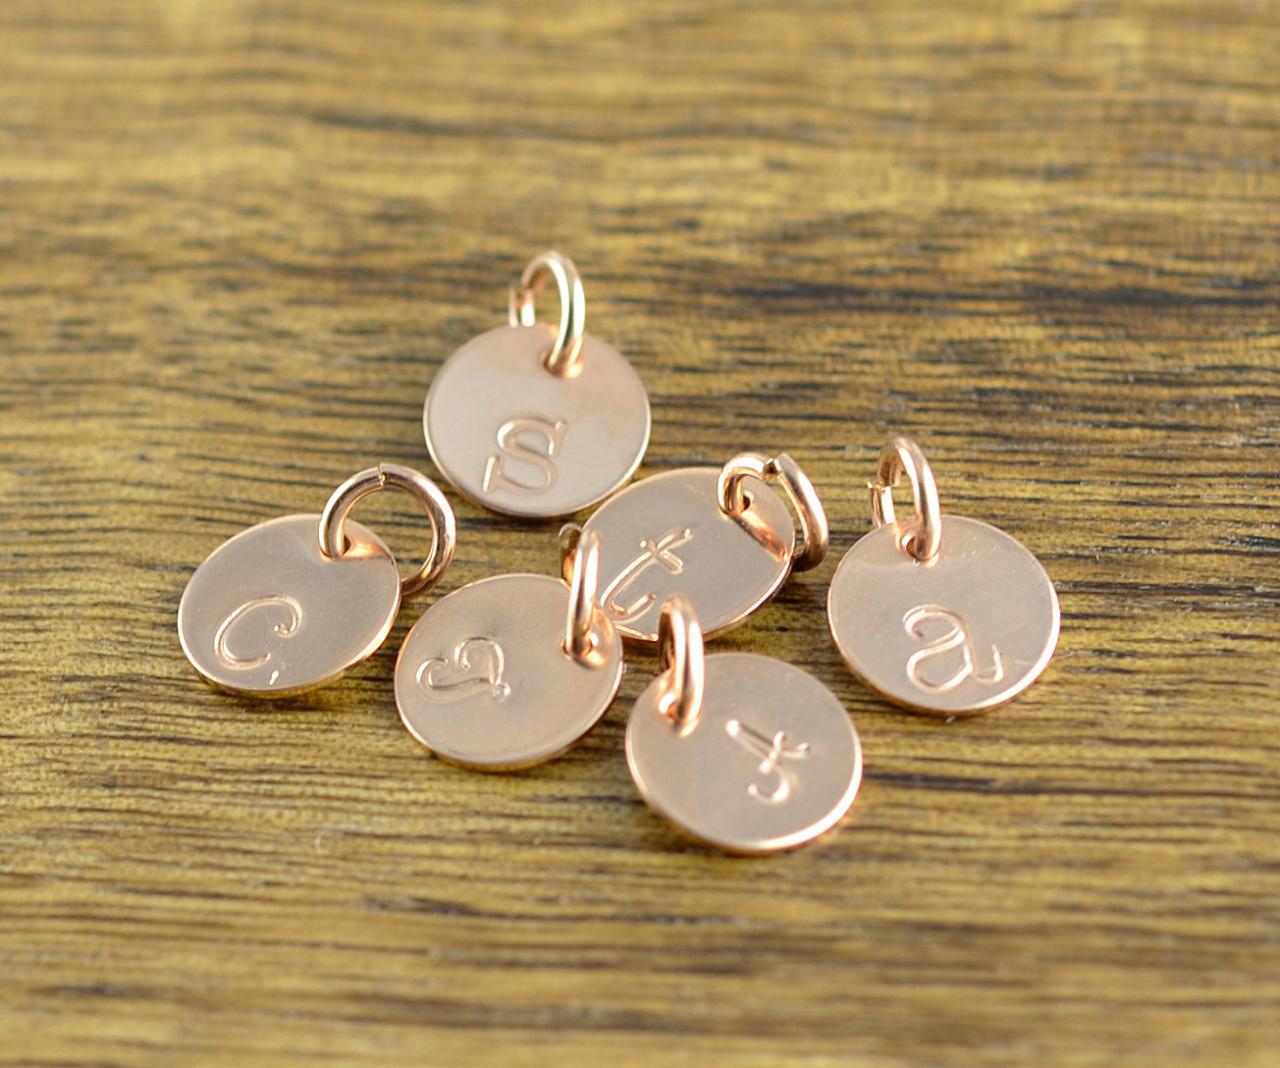 Rose Gold Initial Charm, Personalized Initial, Add A Charm, Hand Stamped Rose Gold Filled Initial Disc, Rose Gold Filled Letter